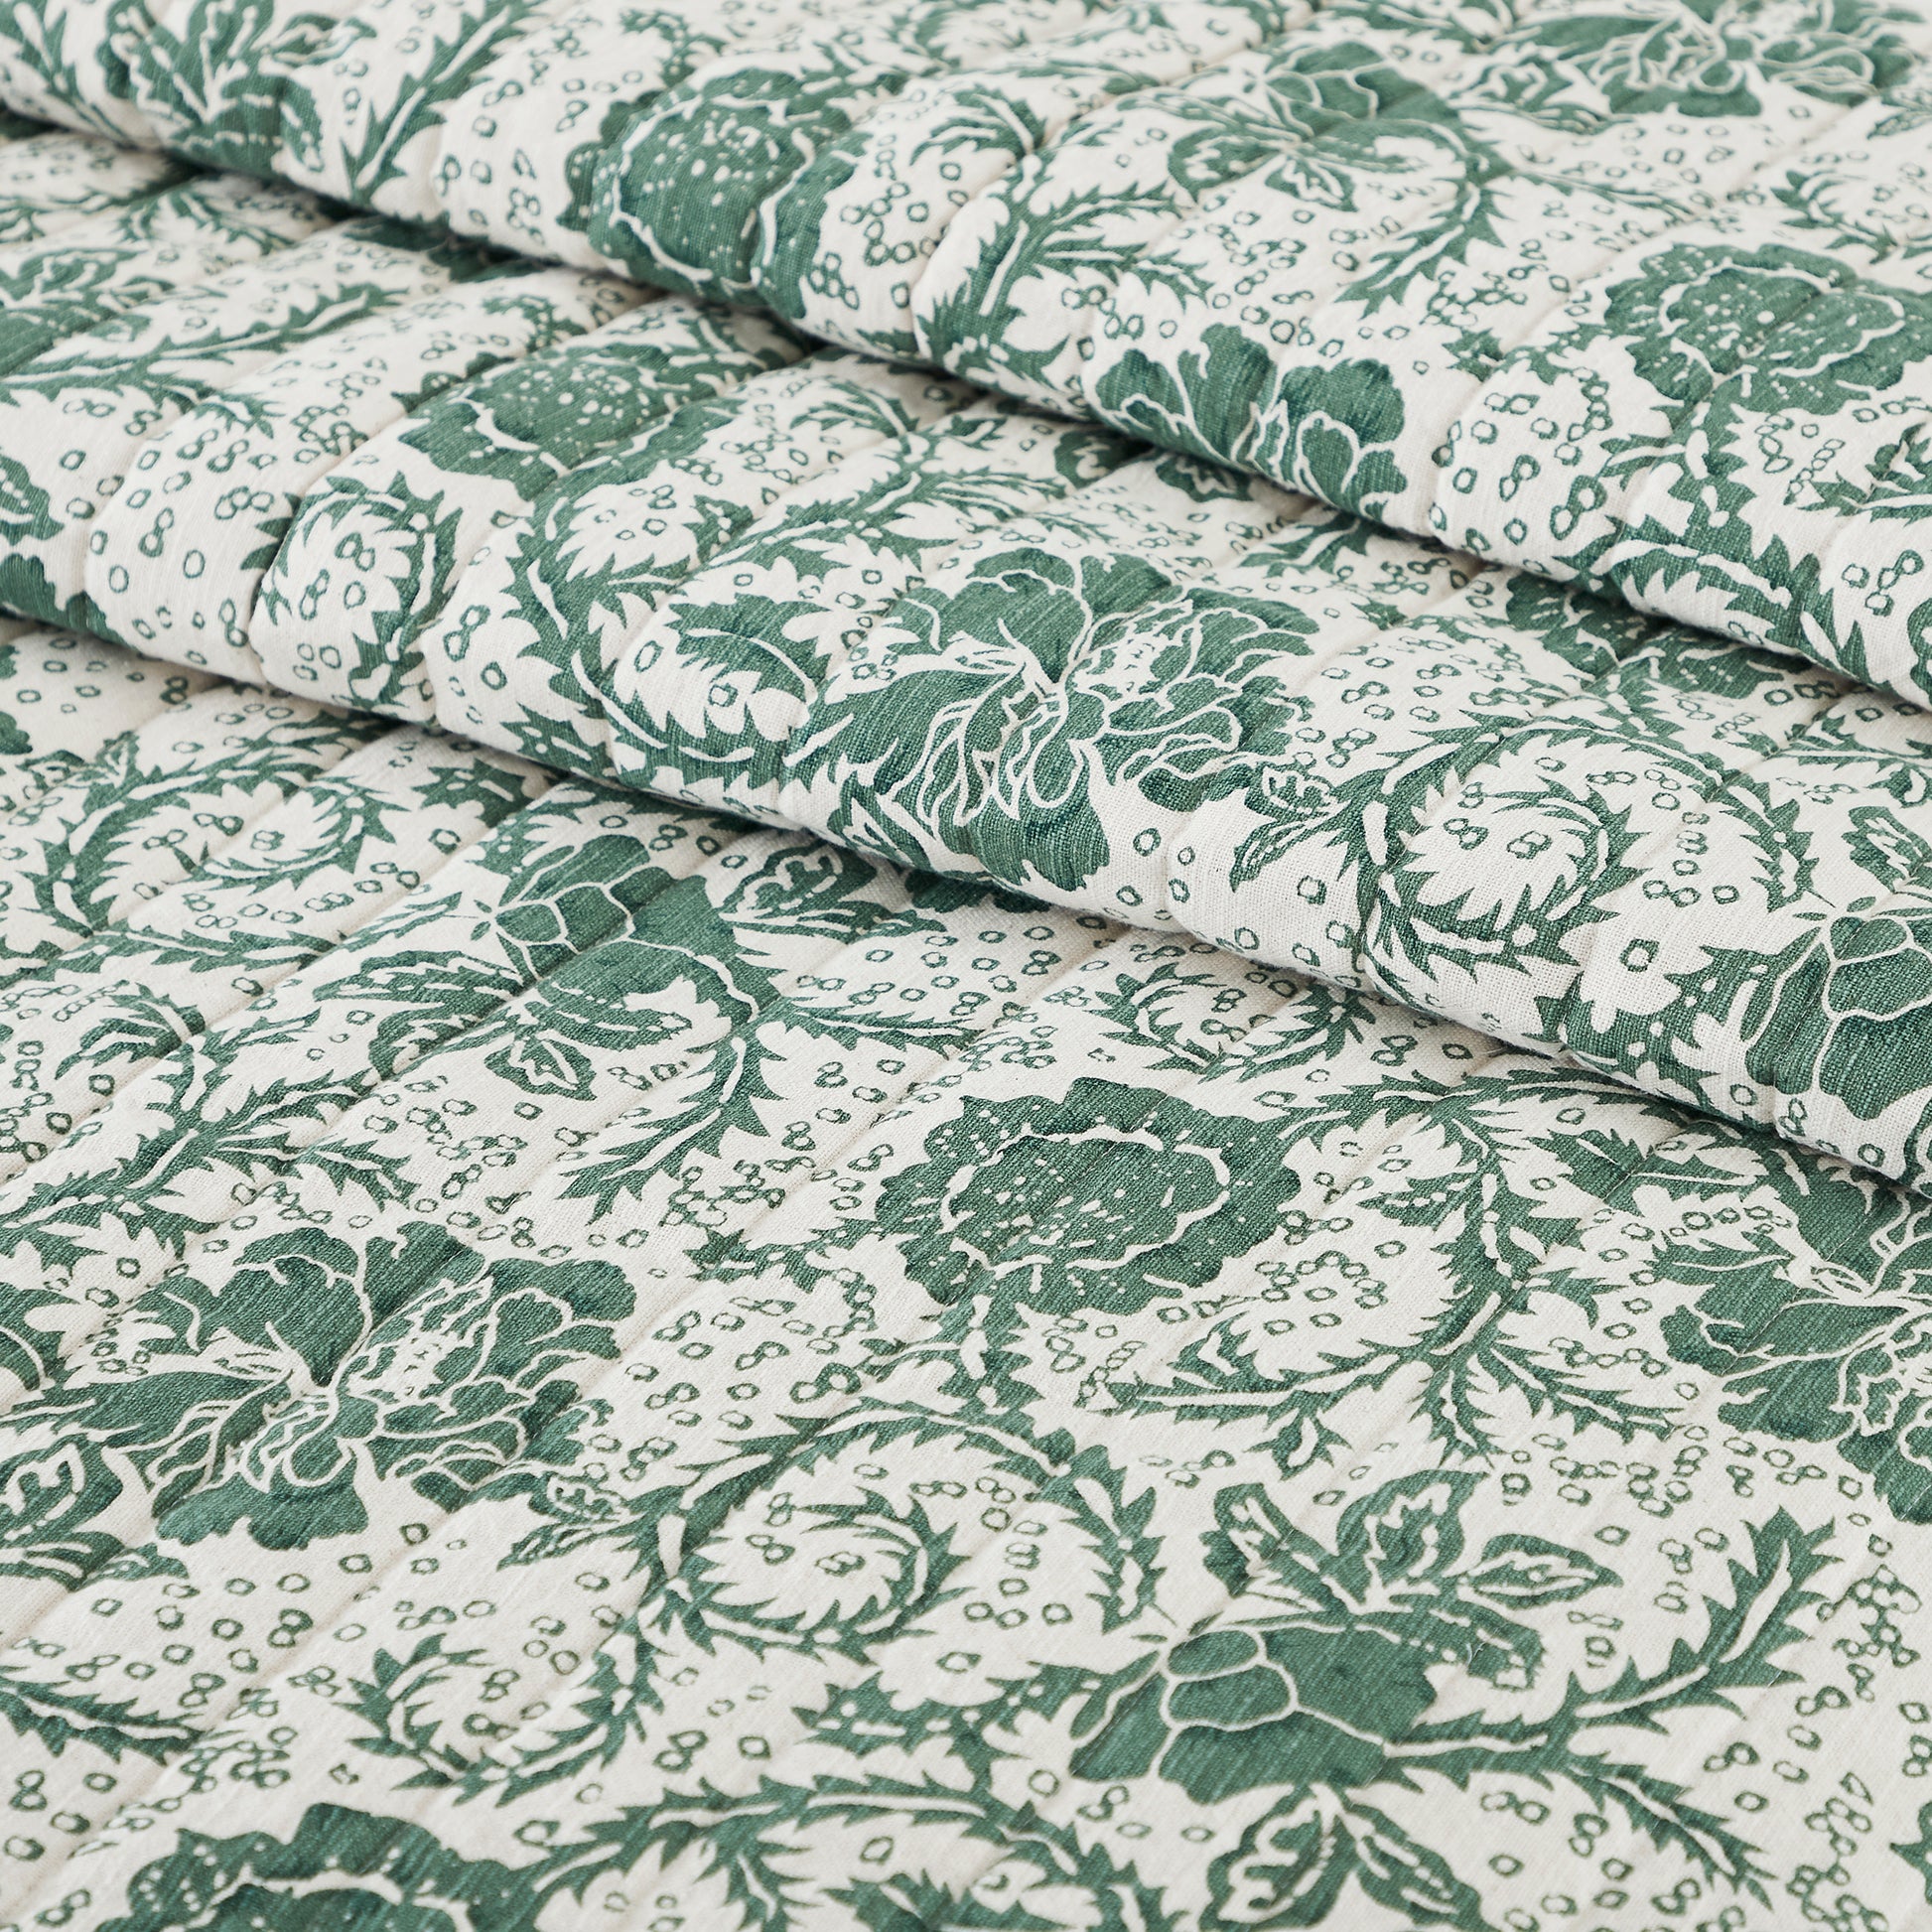 81210-Dorset-Green-Floral-Luxury-King-Quilt-120WX105L-image-4